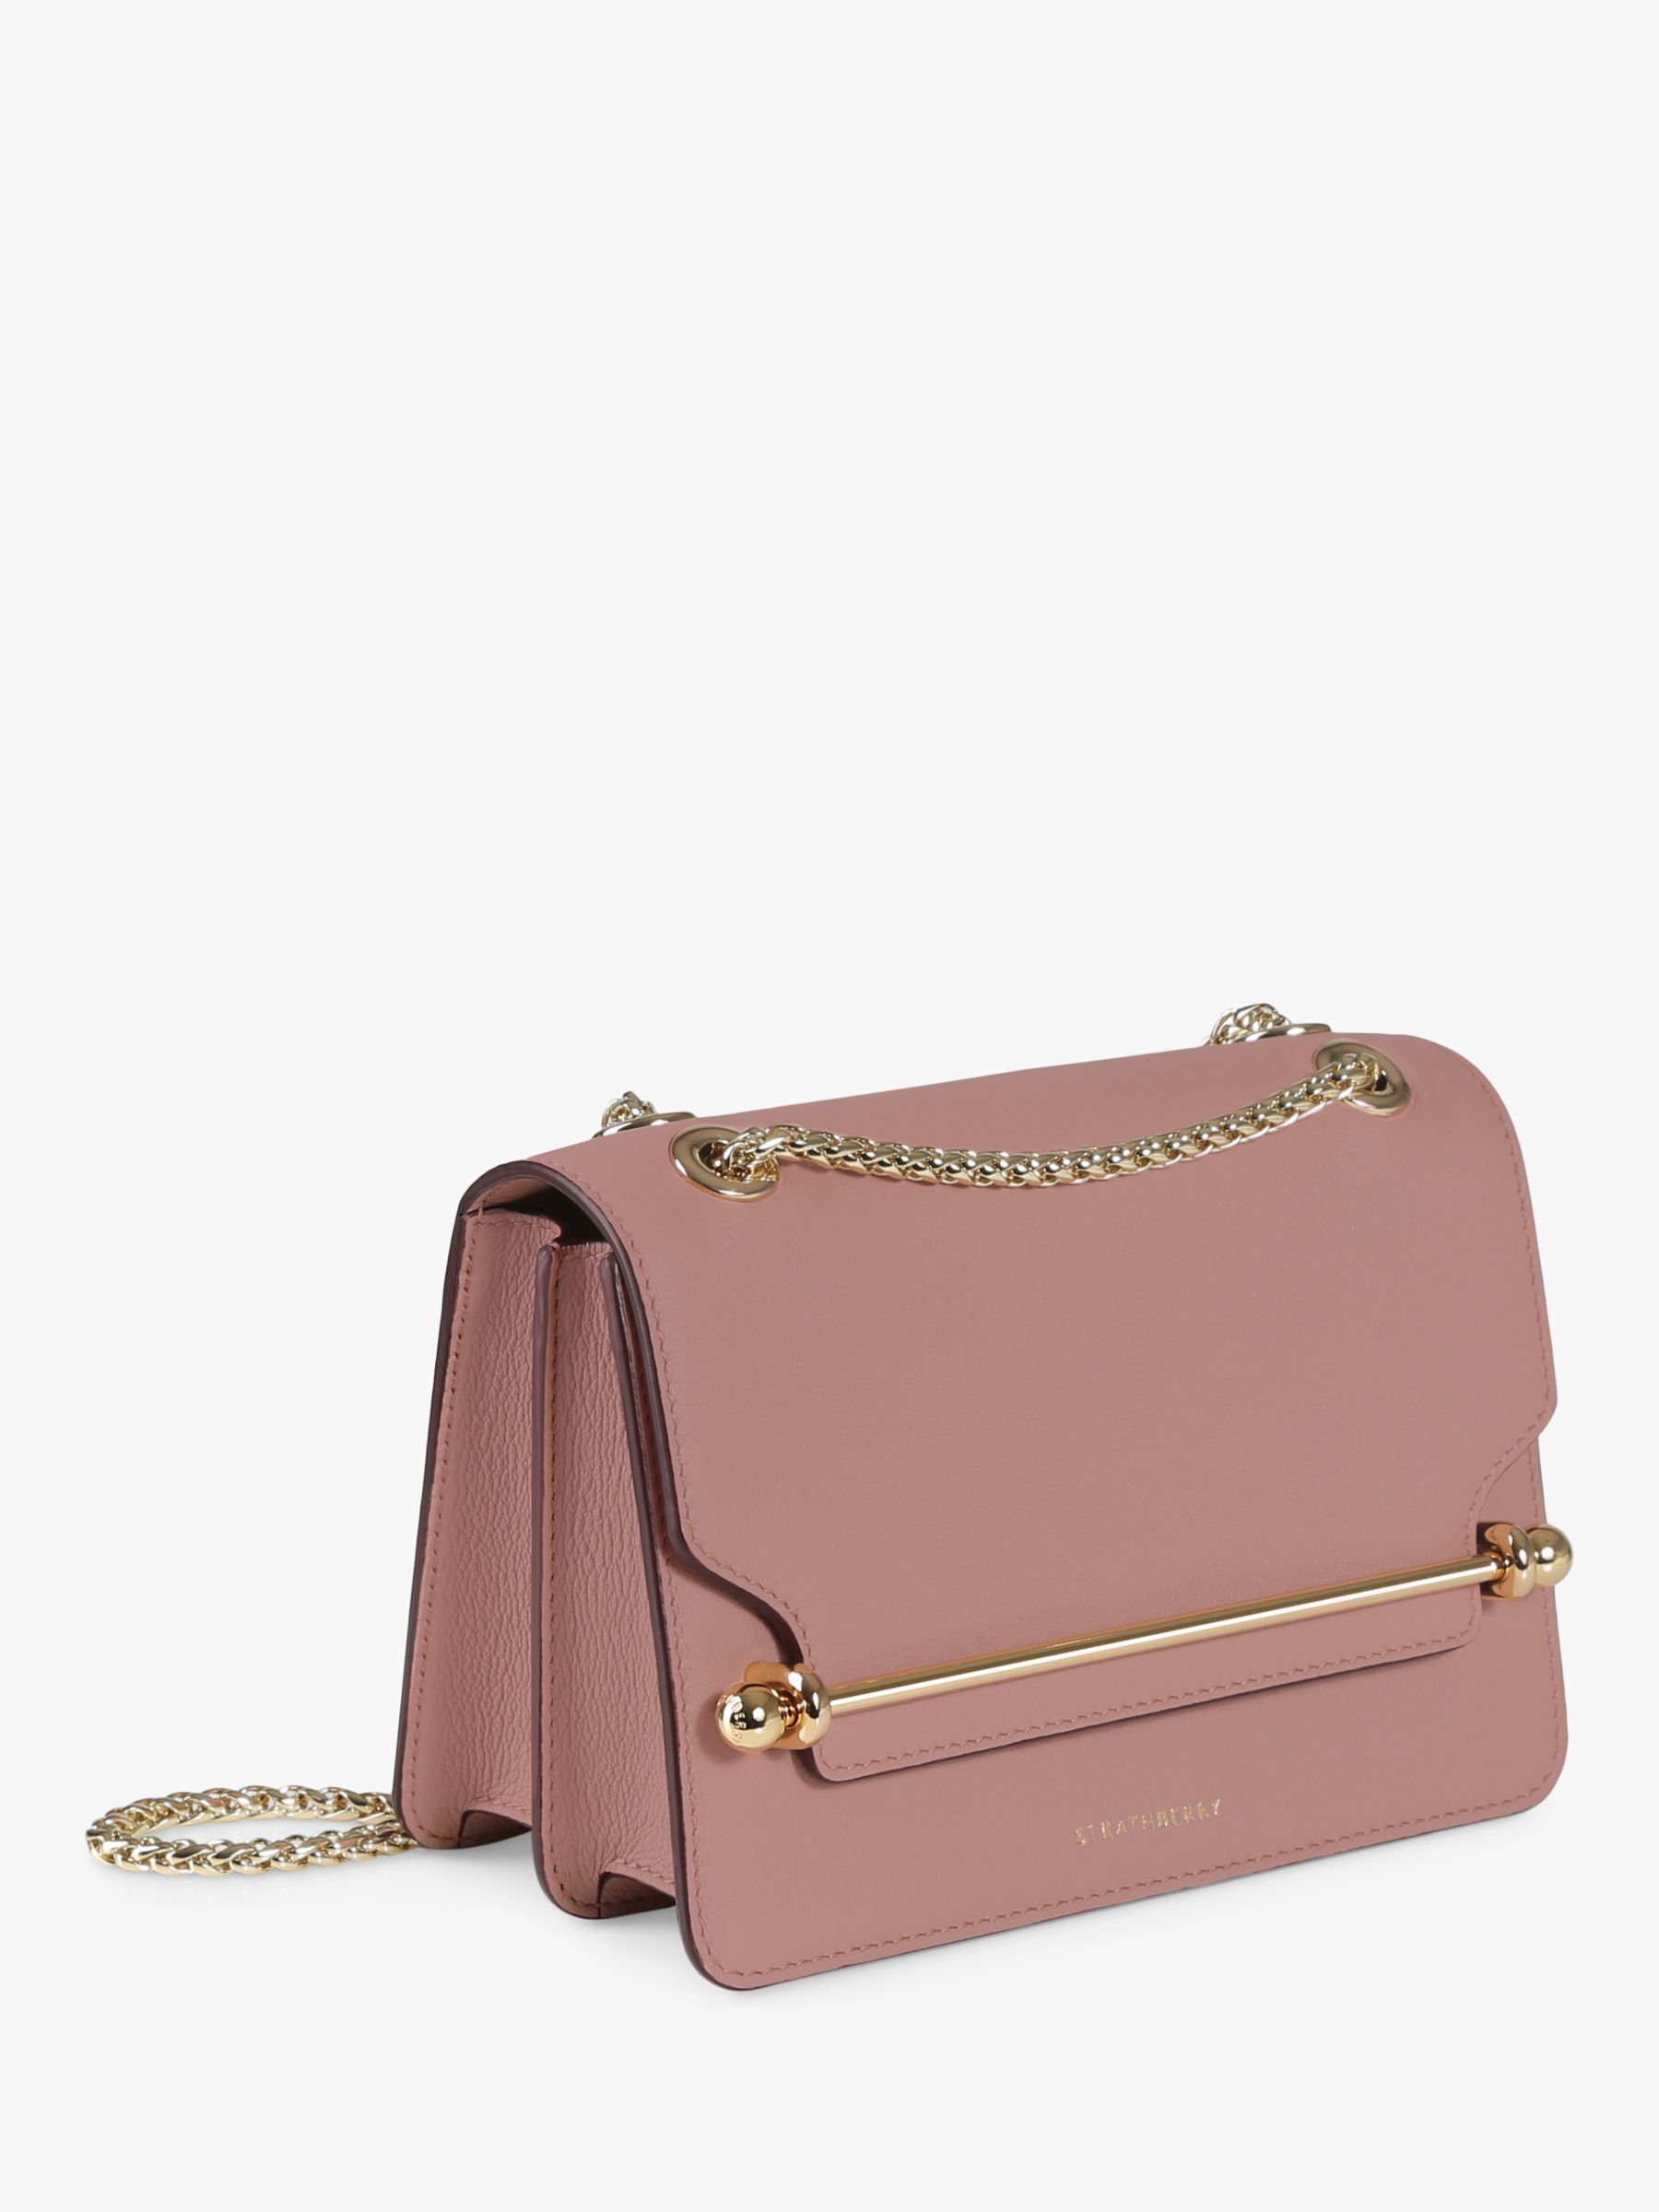 Strathberry East/West Mini Leather Cross Body Bag, Blush Rose at John ...